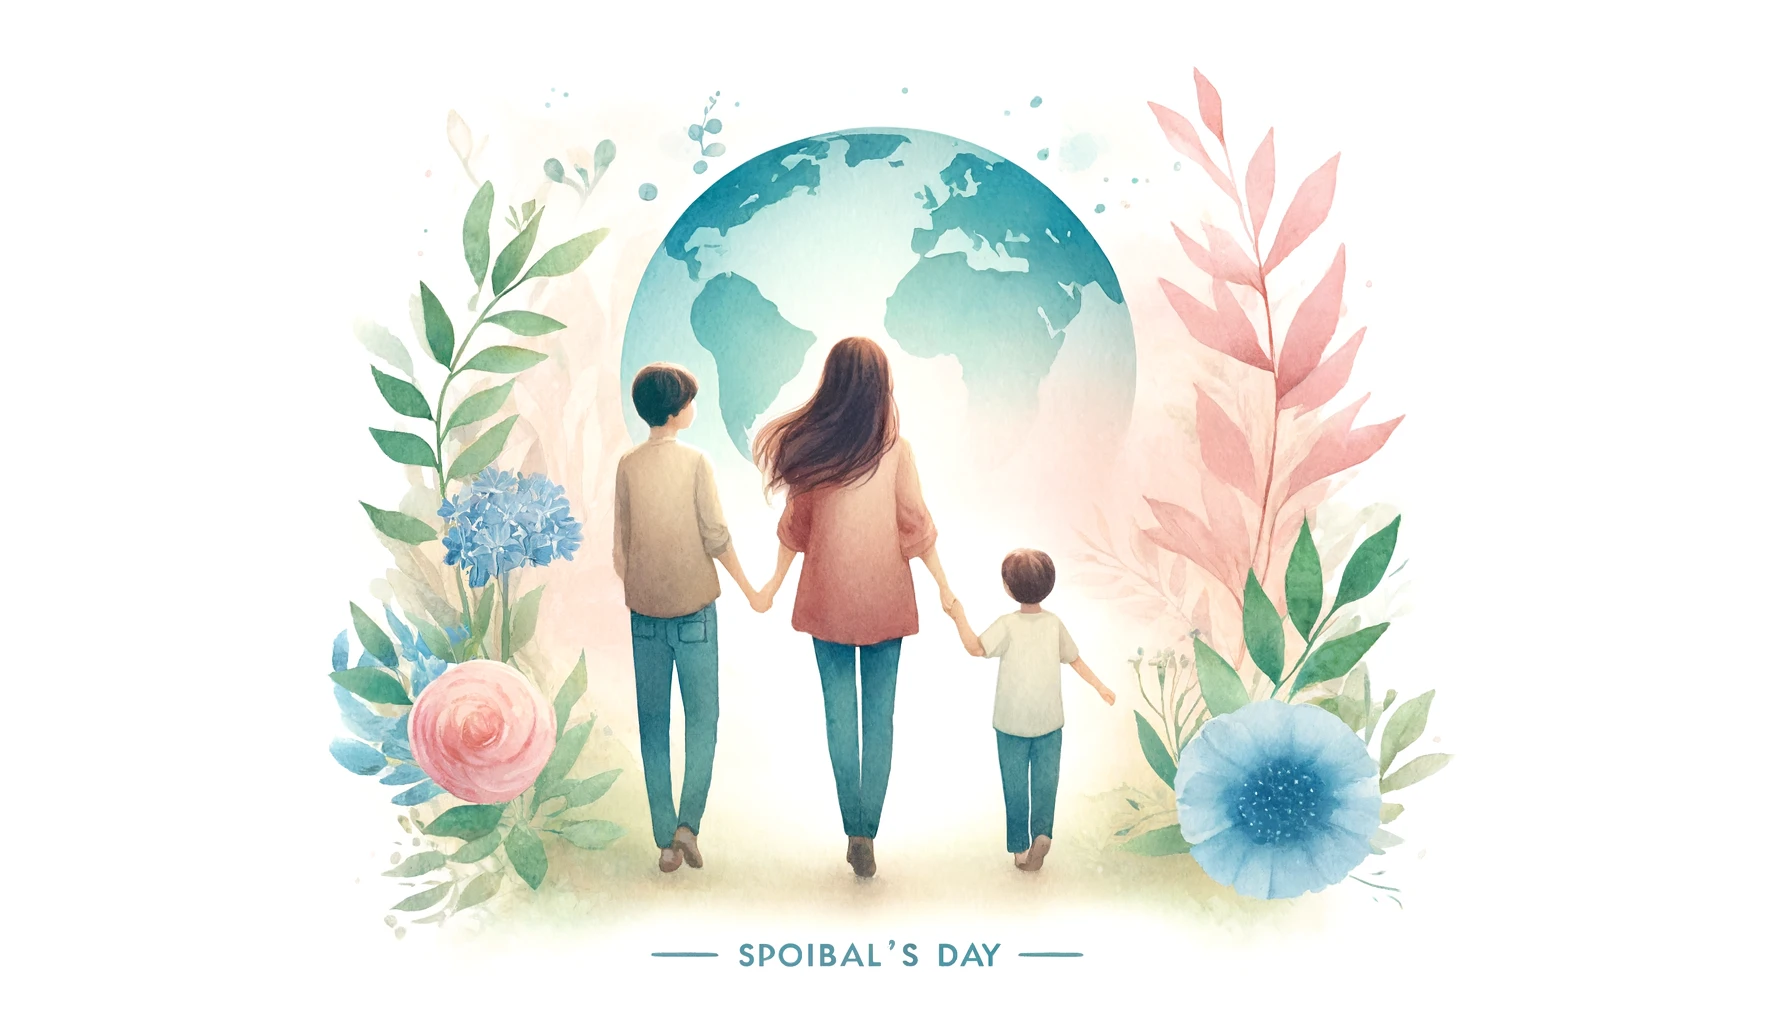 Inspirational Messages to Celebrate Global Day of Parents